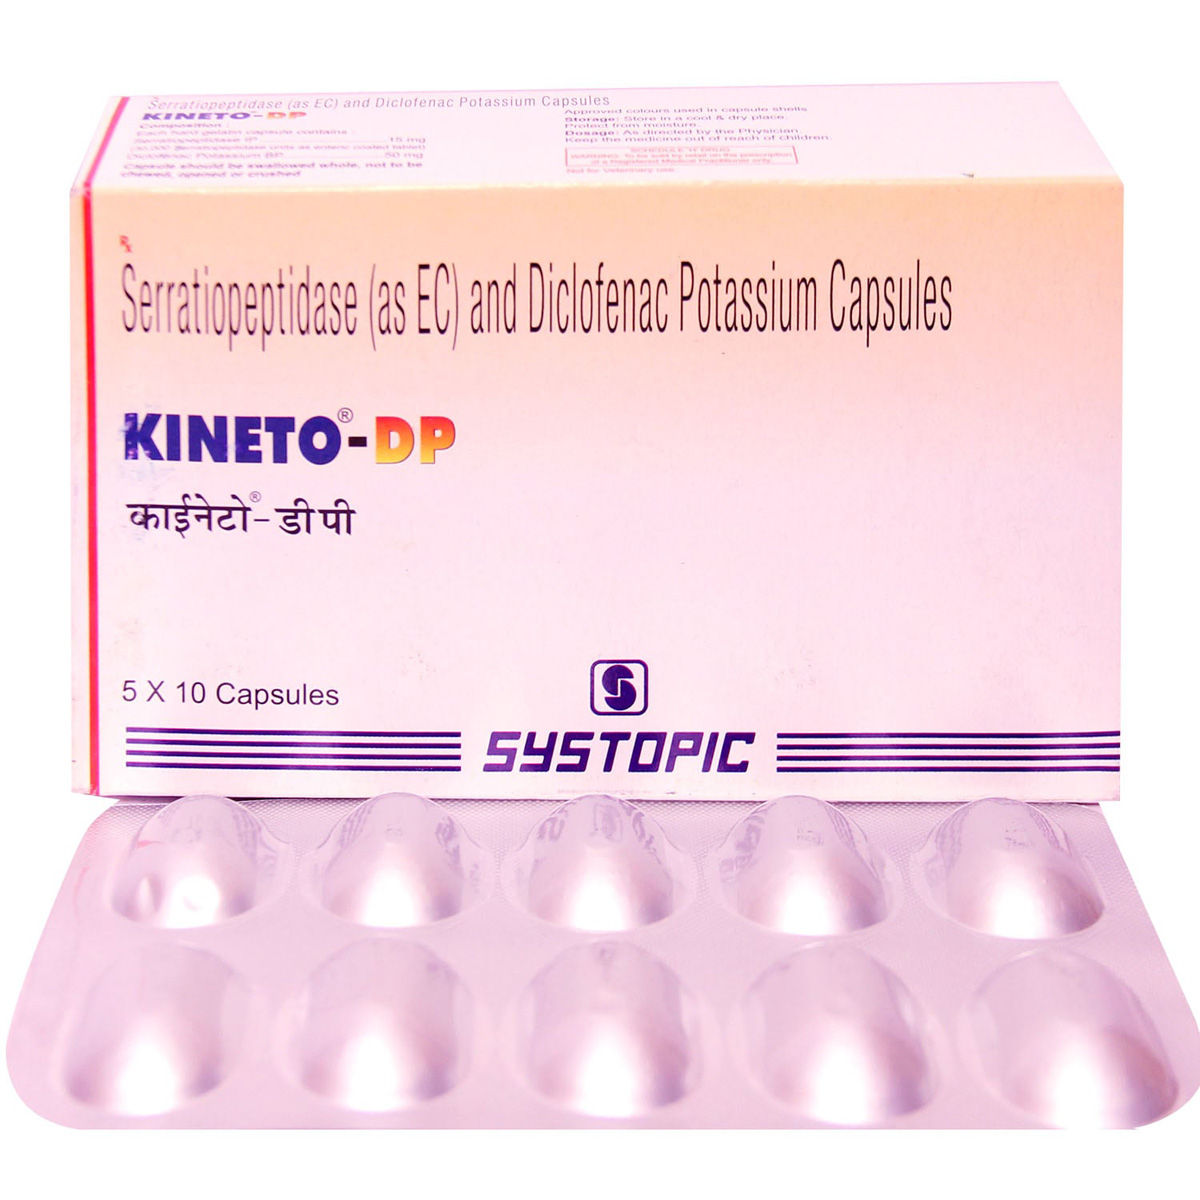 Kineto-DP Capsule 10's Price, Uses, Side Effects, Composition ...